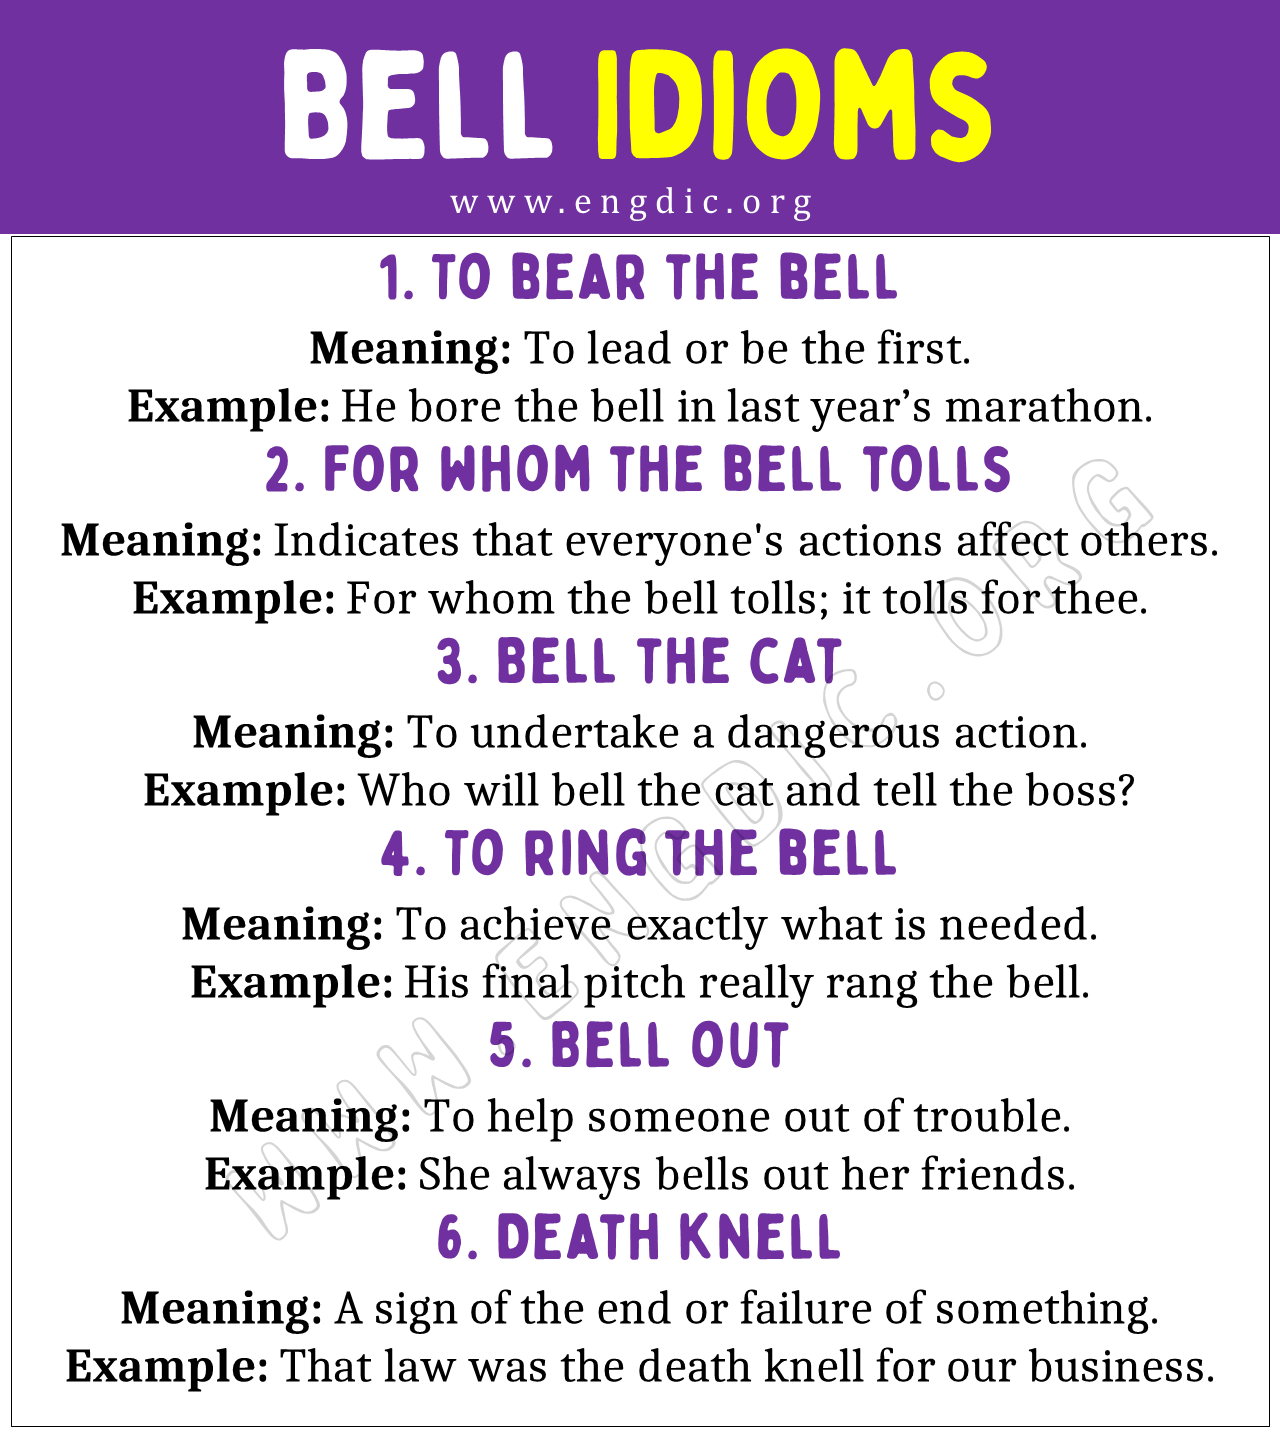 Bell Idioms